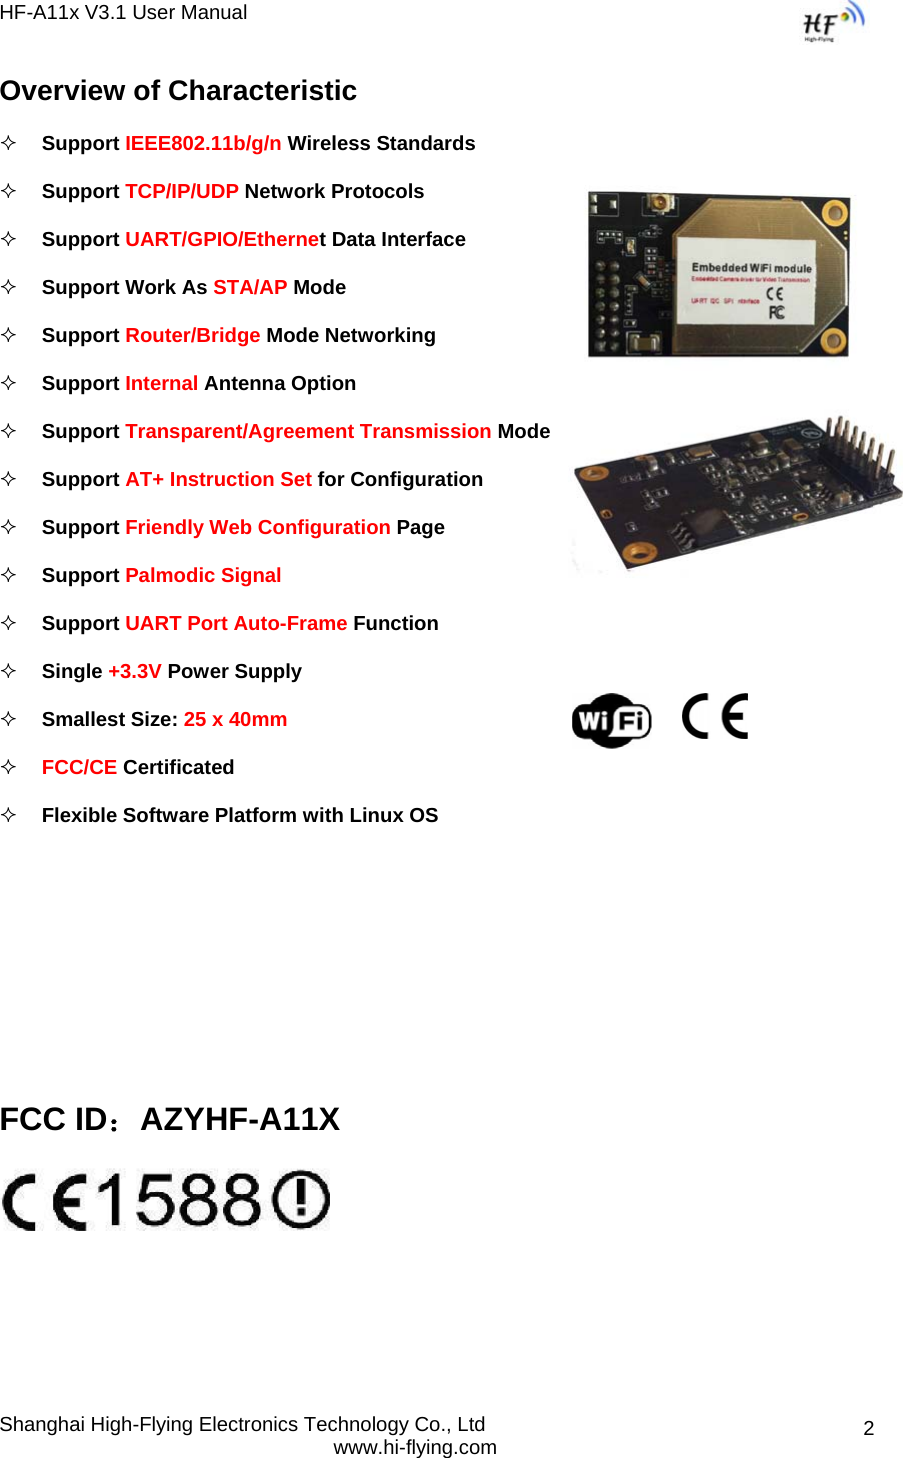 HF-A11x V3.1 User Manual Shanghai High-Flying Electronics Technology Co., Ltd www.hi-flying.com  2Overview of Characteristic  Support IEEE802.11b/g/n Wireless Standards  Support TCP/IP/UDP Network Protocols  Support UART/GPIO/Ethernet Data Interface  Support Work As STA/AP Mode  Support Router/Bridge Mode Networking  Support Internal Antenna Option  Support Transparent/Agreement Transmission Mode  Support AT+ Instruction Set for Configuration   Support Friendly Web Configuration Page   Support Palmodic Signal  Support UART Port Auto-Frame Function   Single +3.3V Power Supply  Smallest Size: 25 x 40mm   FCC/CE Certificated  Flexible Software Platform with Linux OS     FCC ID：AZYHF-A11X    